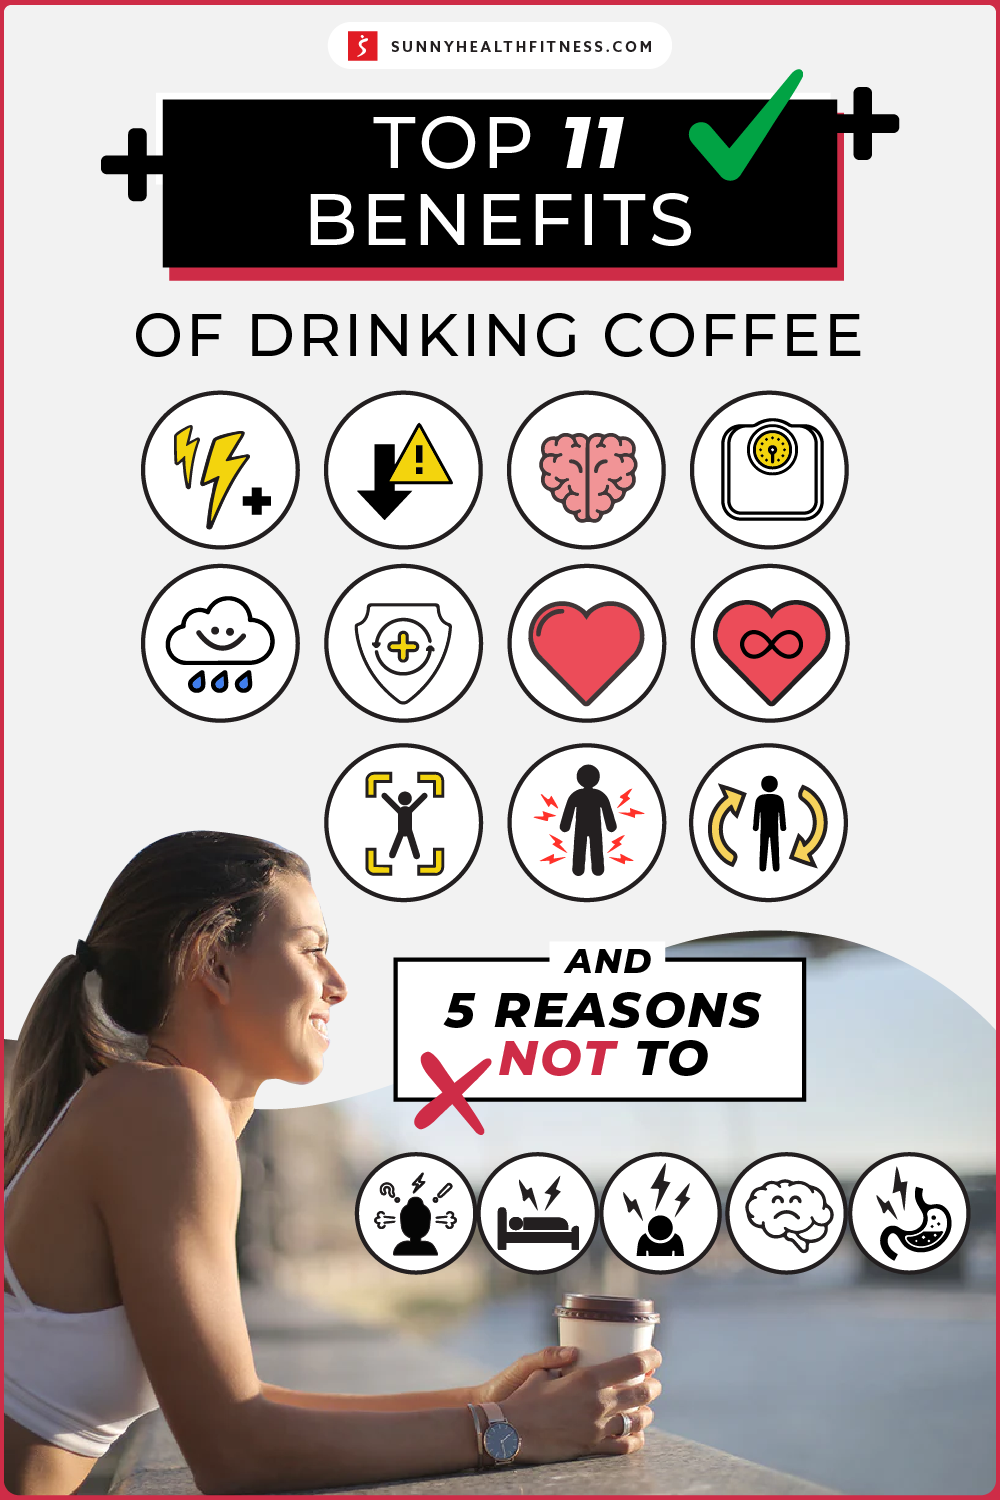 Pros and cons of drinking coffee